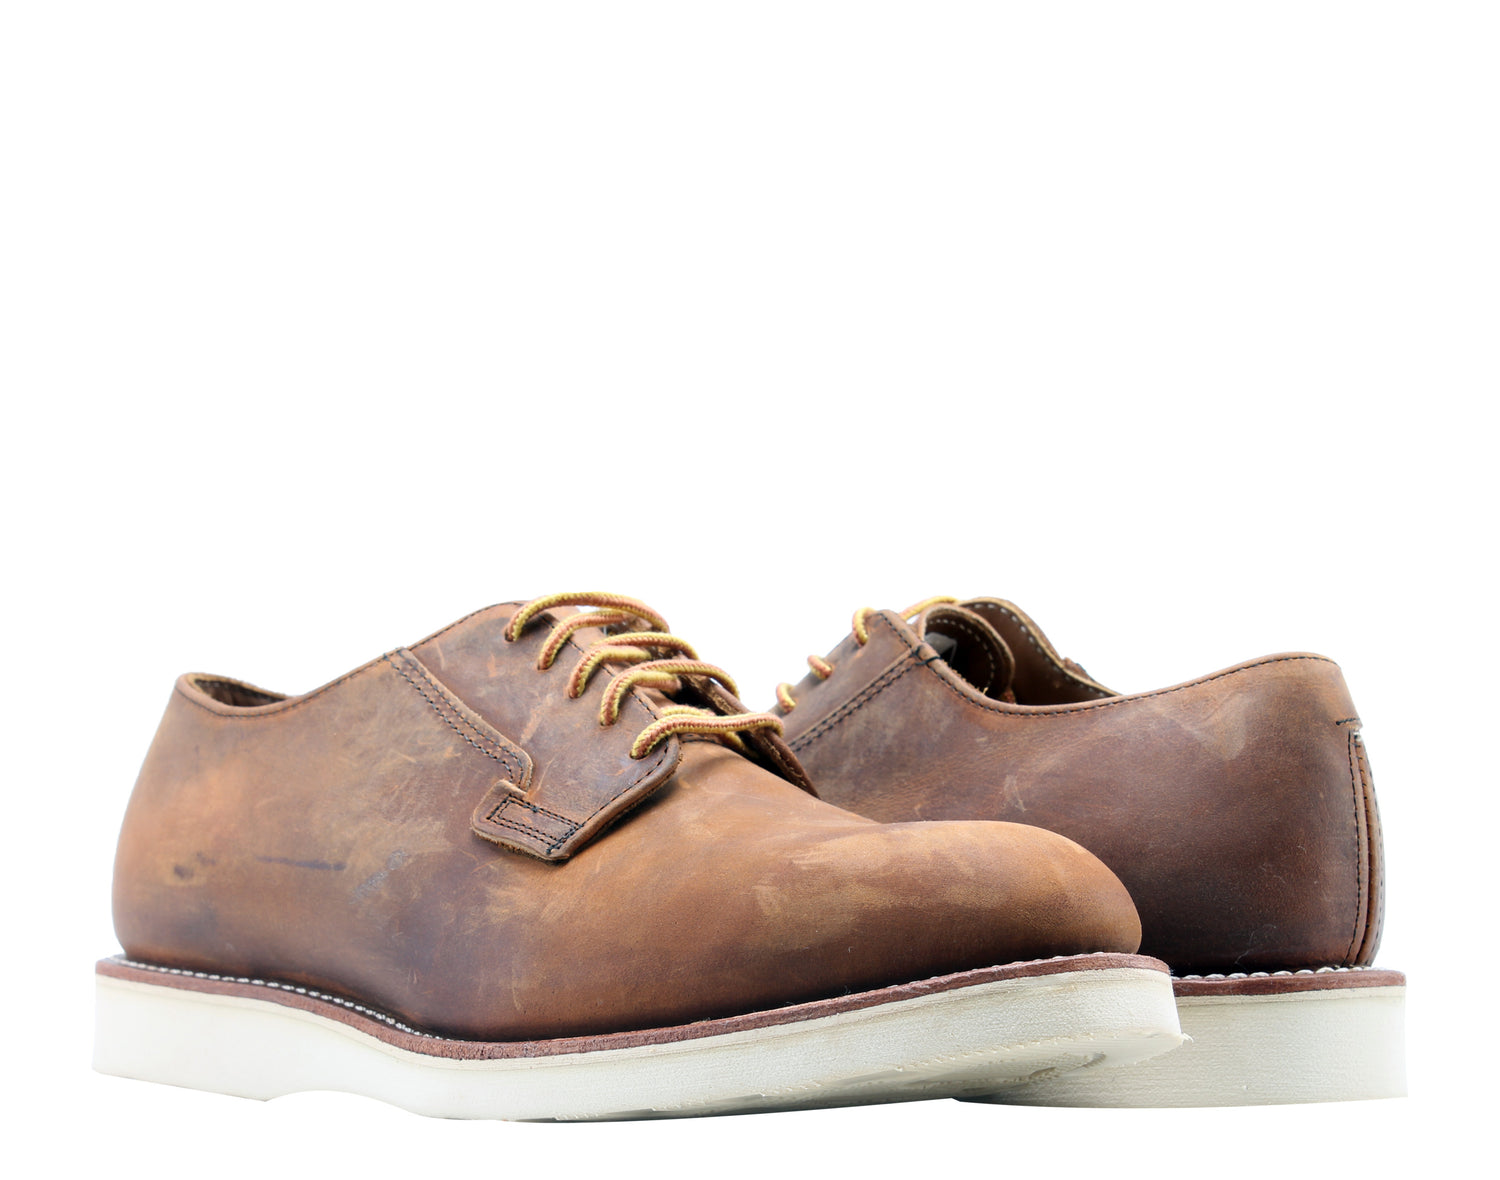 Red Wing Heritage Postman Oxford 3107 Men's Shoes